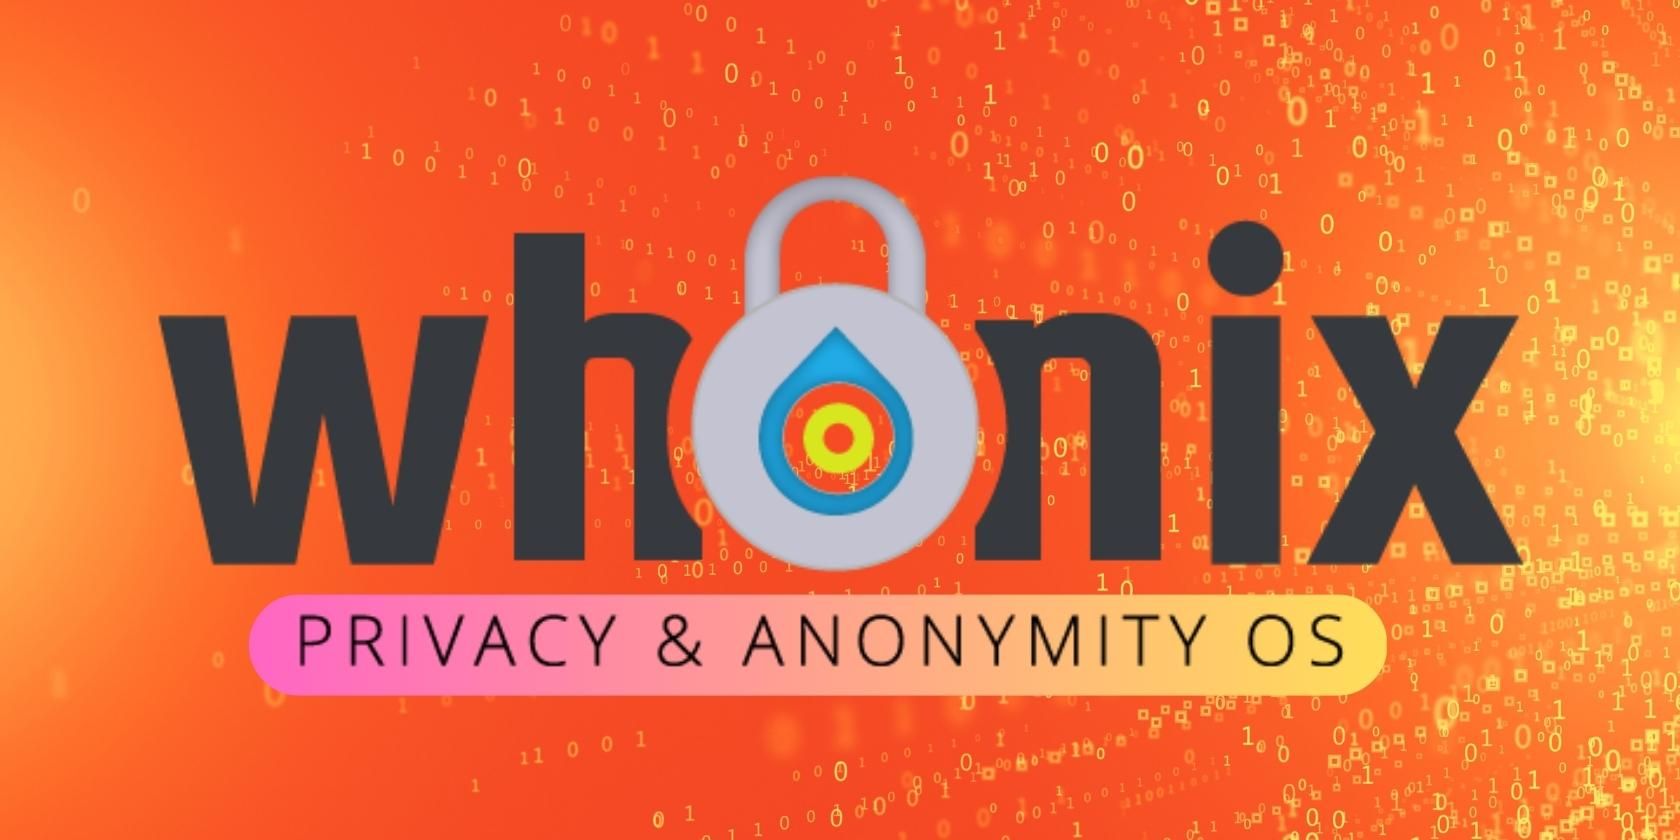 How to Browse the Internet Anonymously ❌